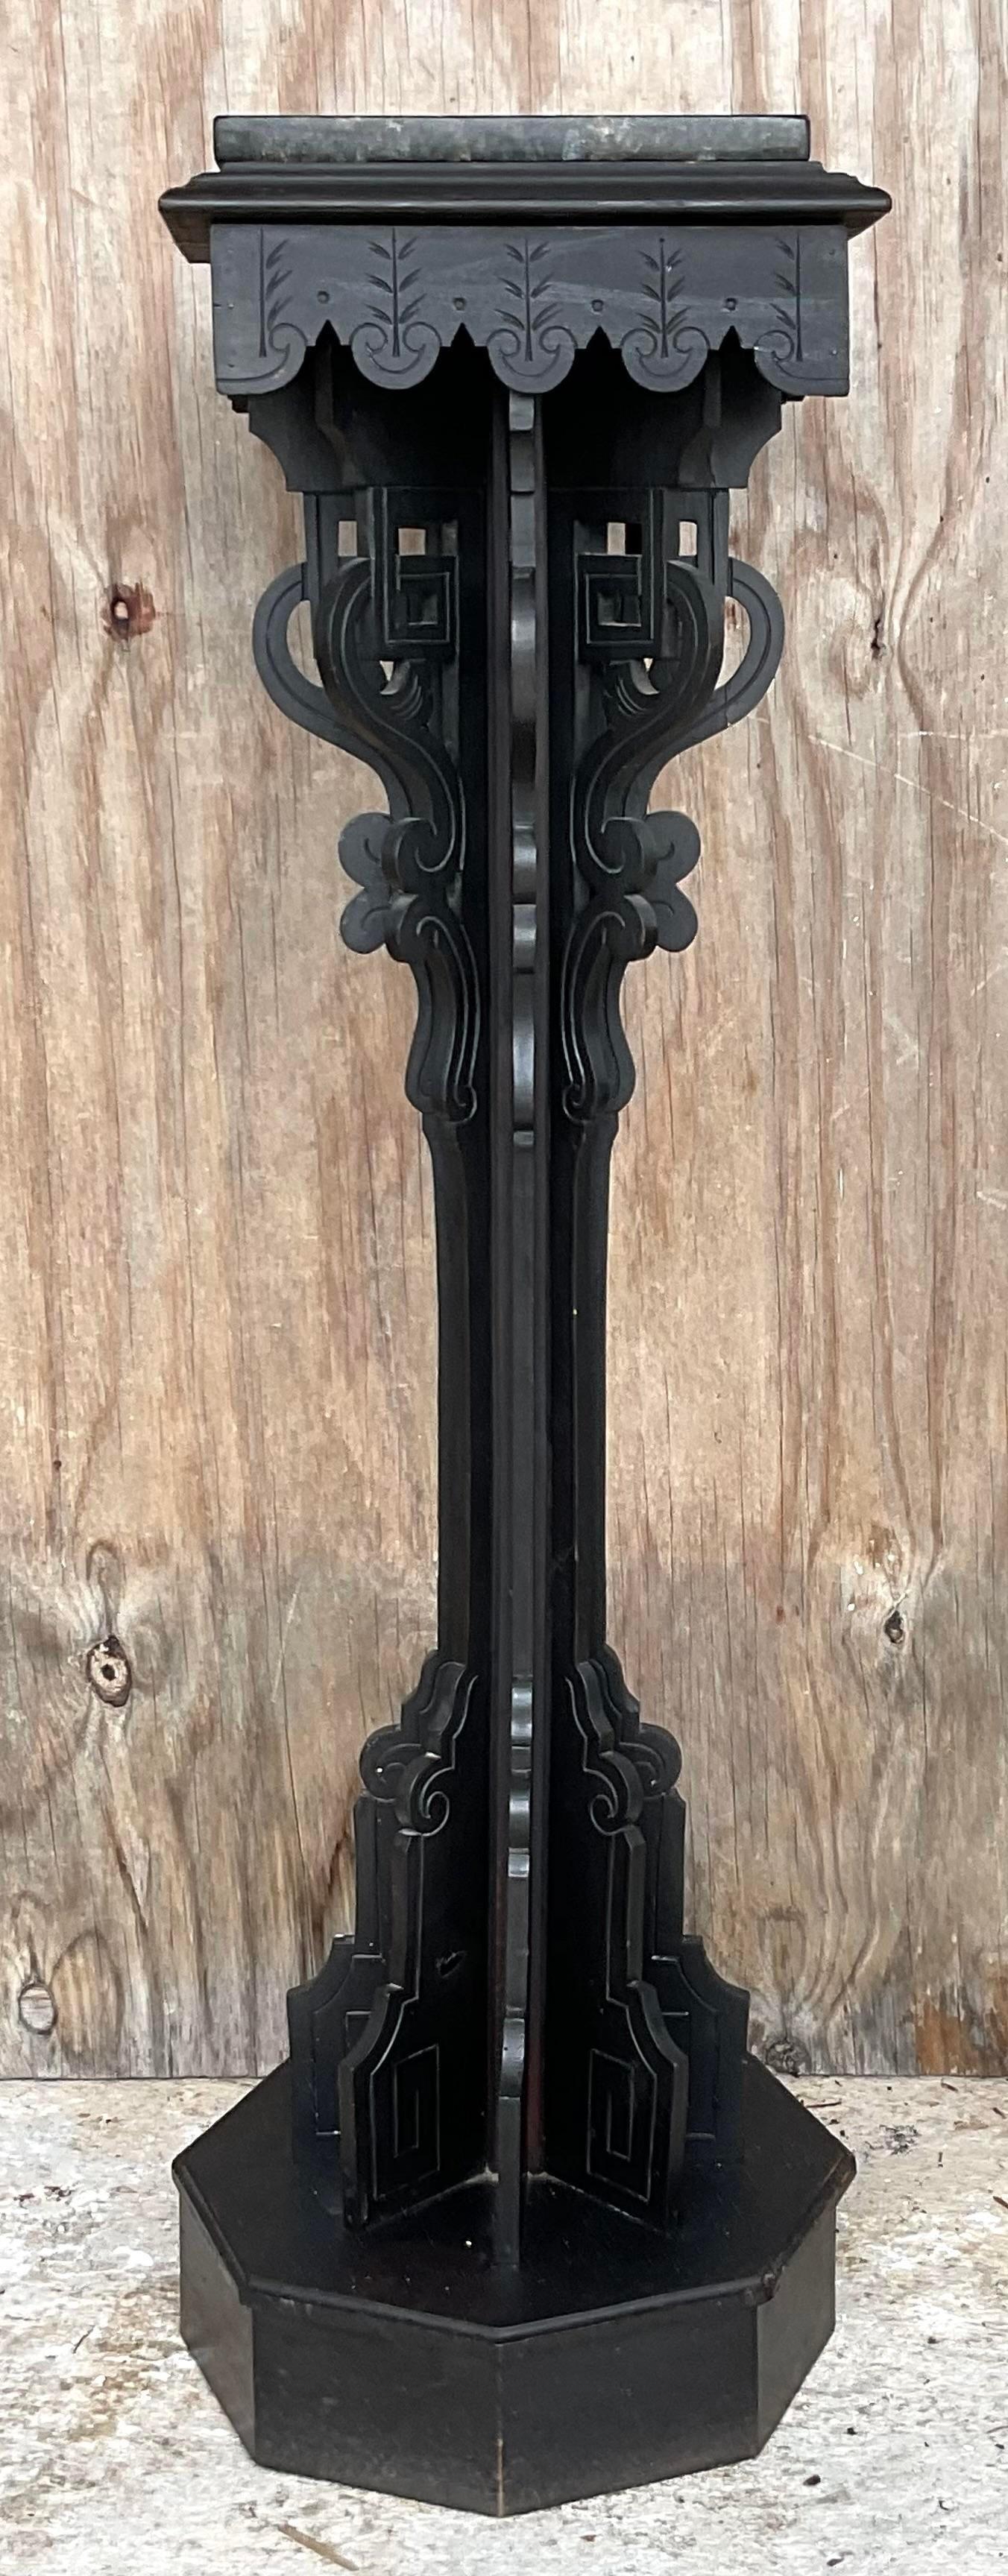 A fantastic vintage Boho wooden pedestal. A classic Eastlake design with the iconic mill work detail. Black stone square rests on top. Acquired from a Palm Beach estate.